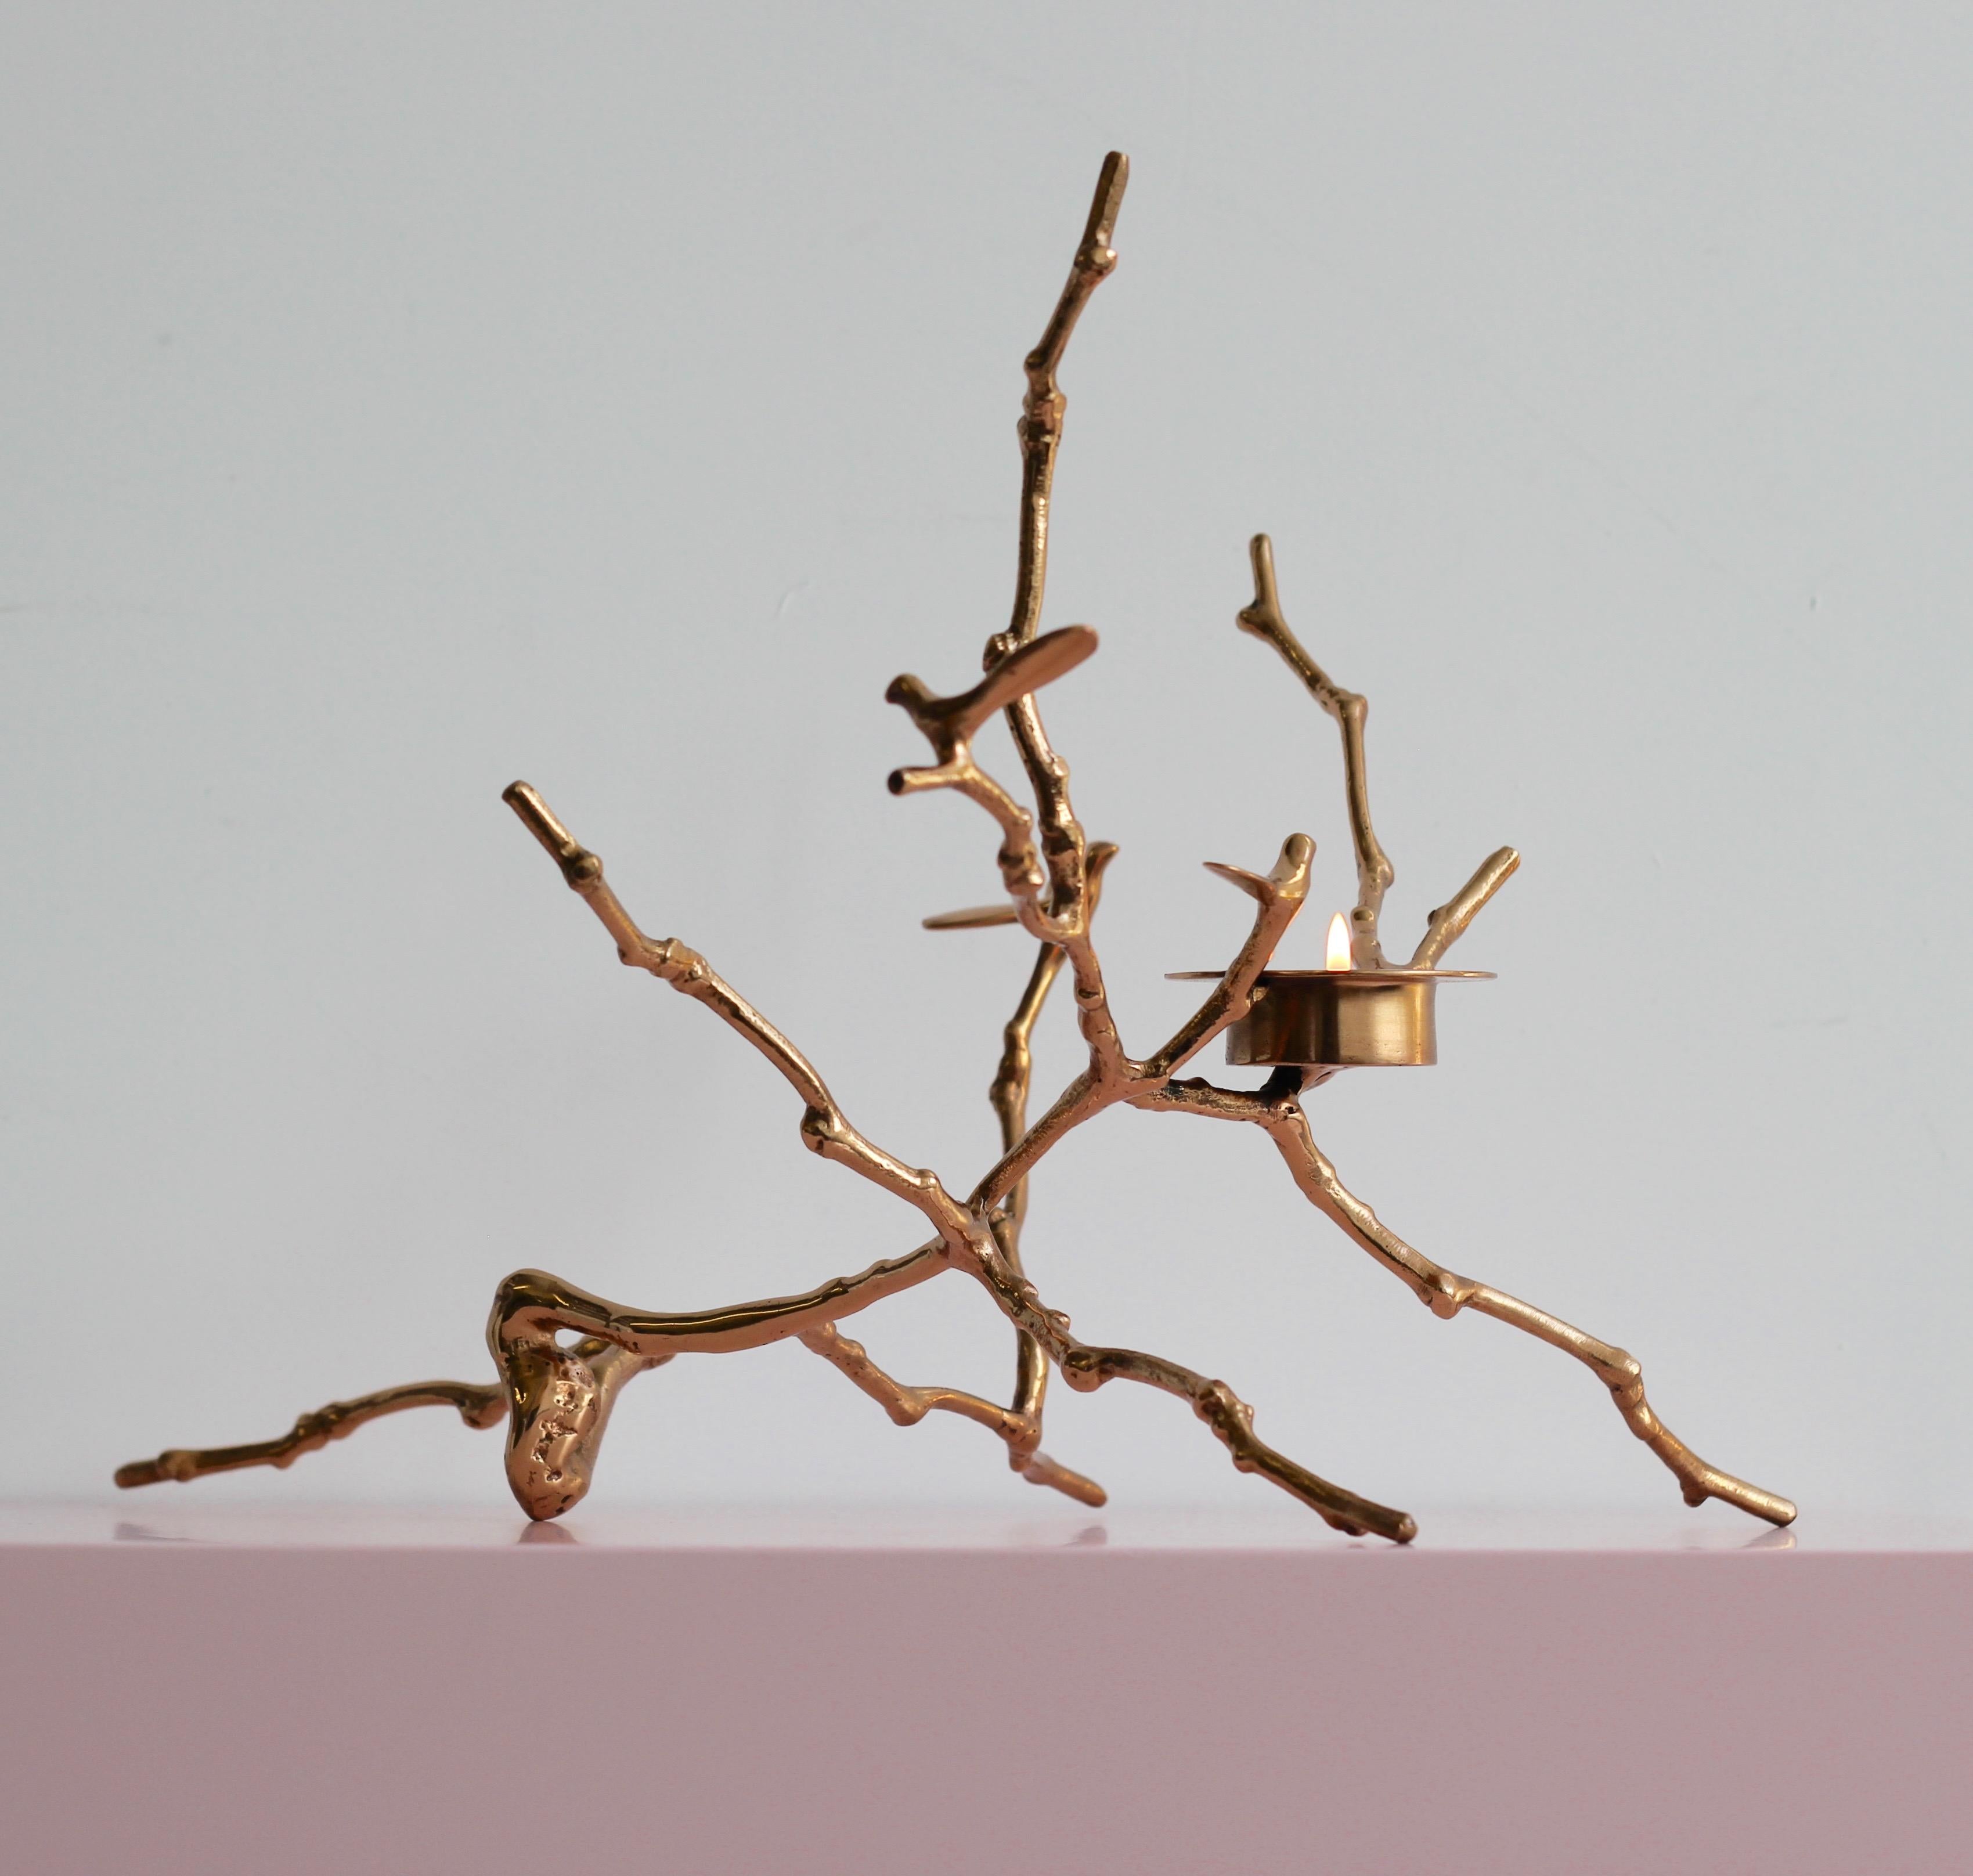 Original, unique and cast in bronze, creating sumptuous and unusual decorative elements for beautiful homes.

Each of these splendid bronze Magnolia twig T-light holders is handmade individually with incredible detail. Cast using very traditional